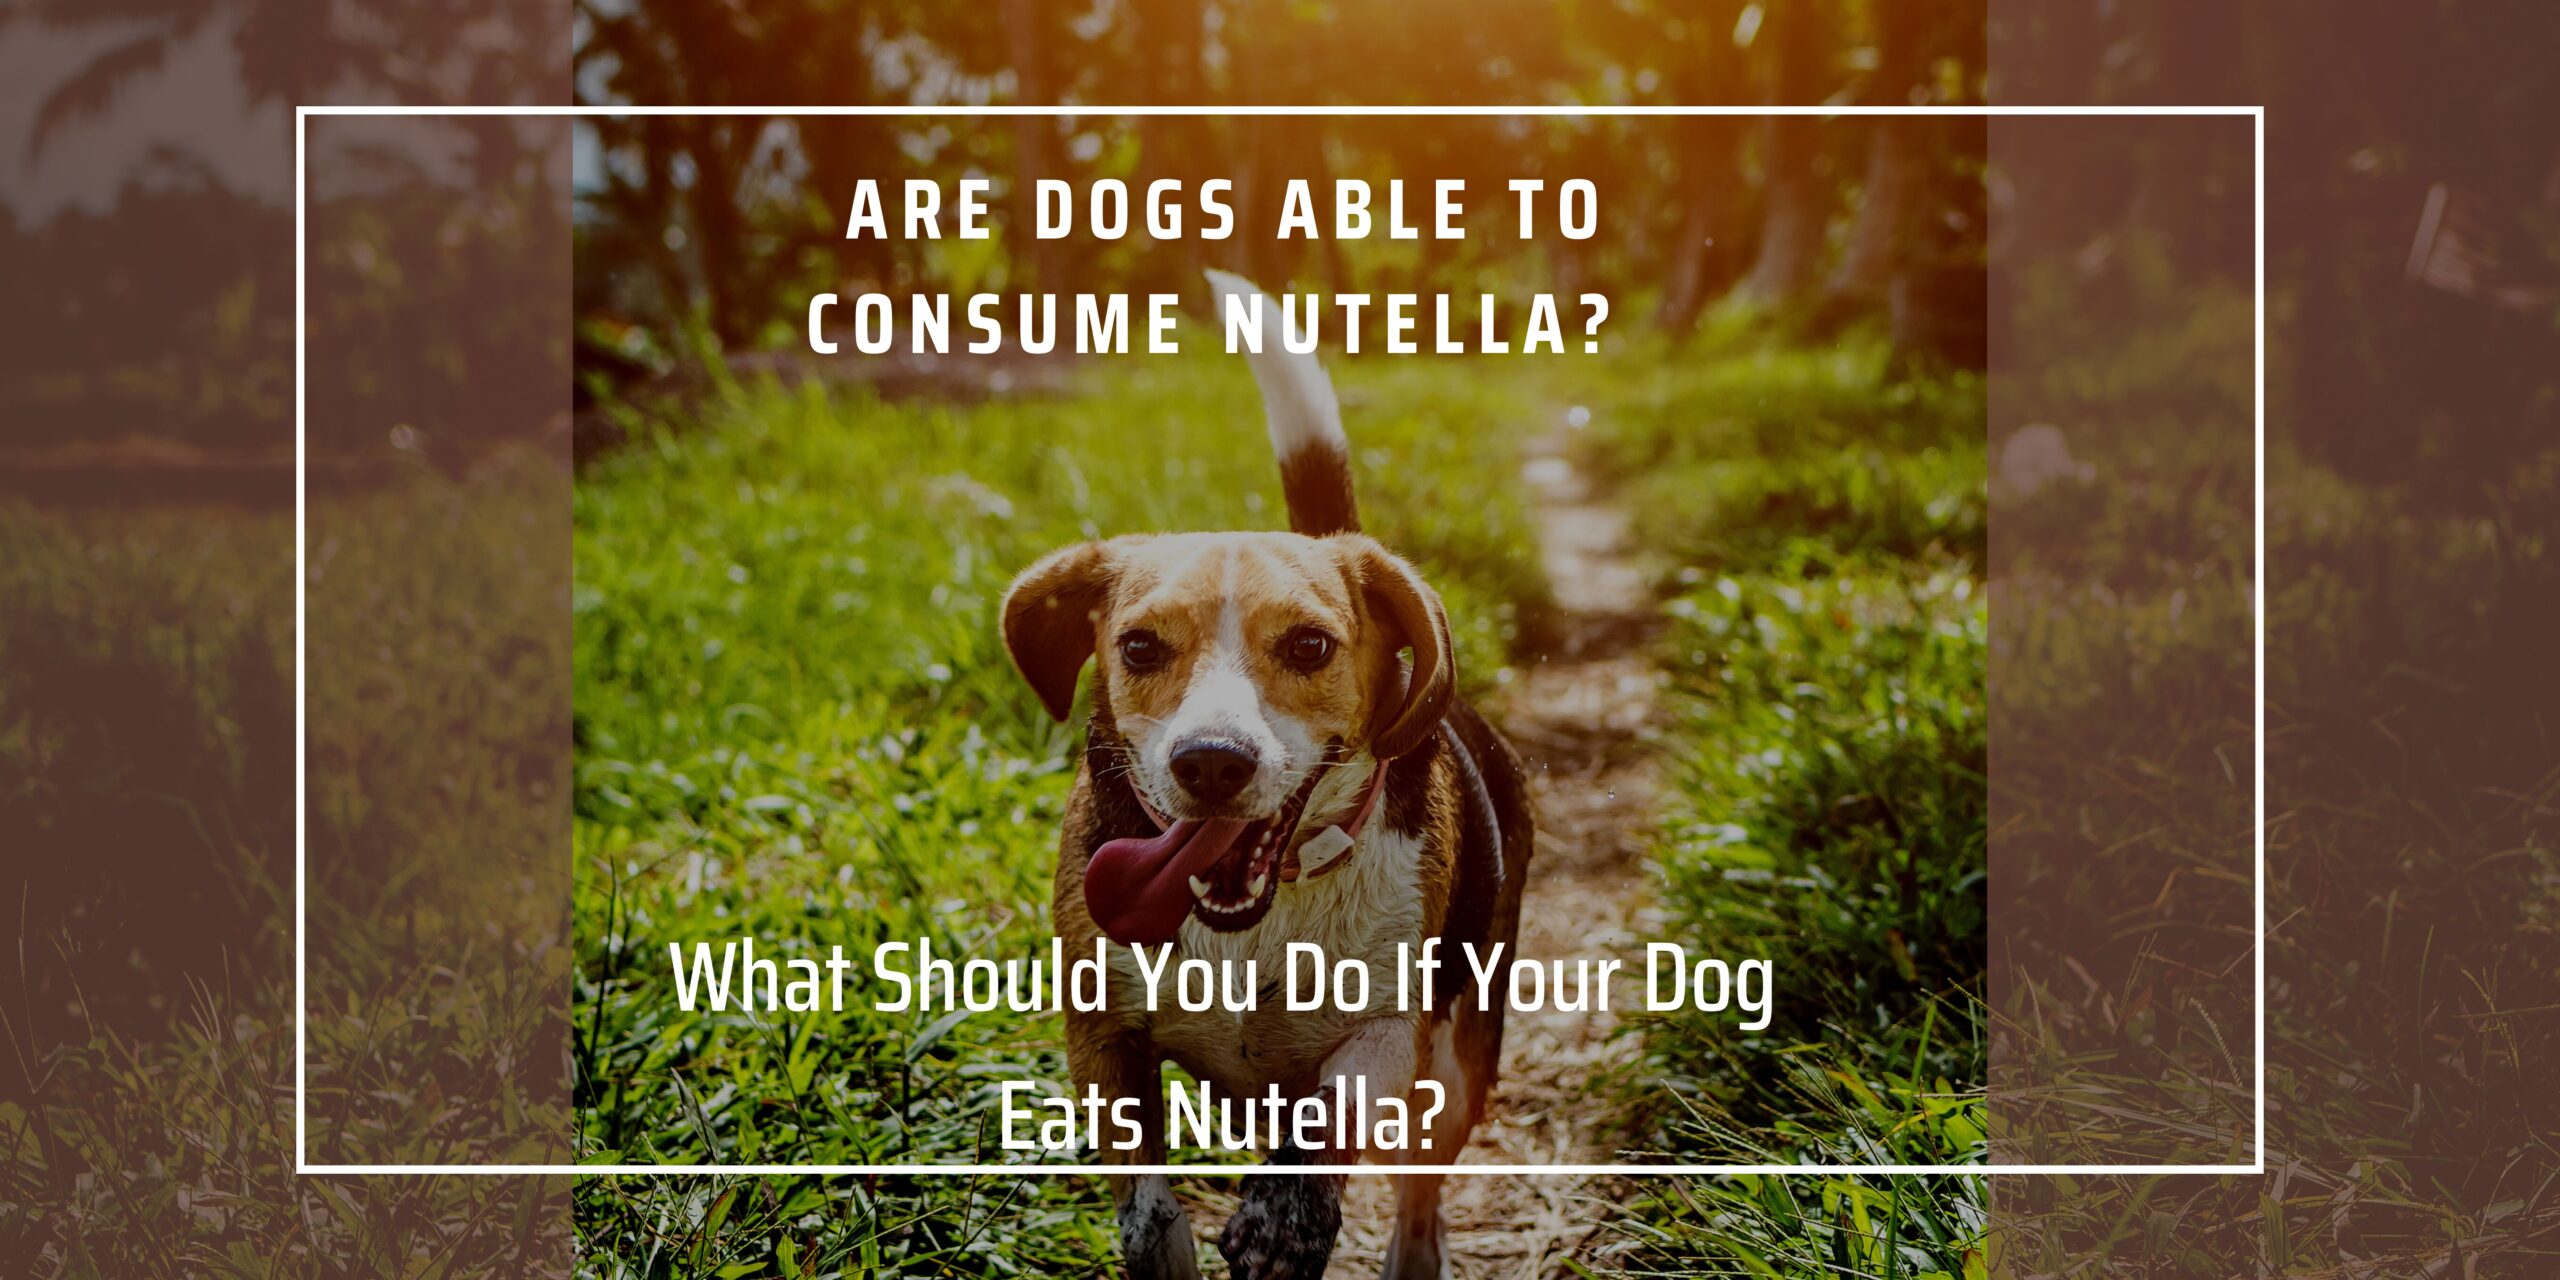 Can Dogs Consume Nutella